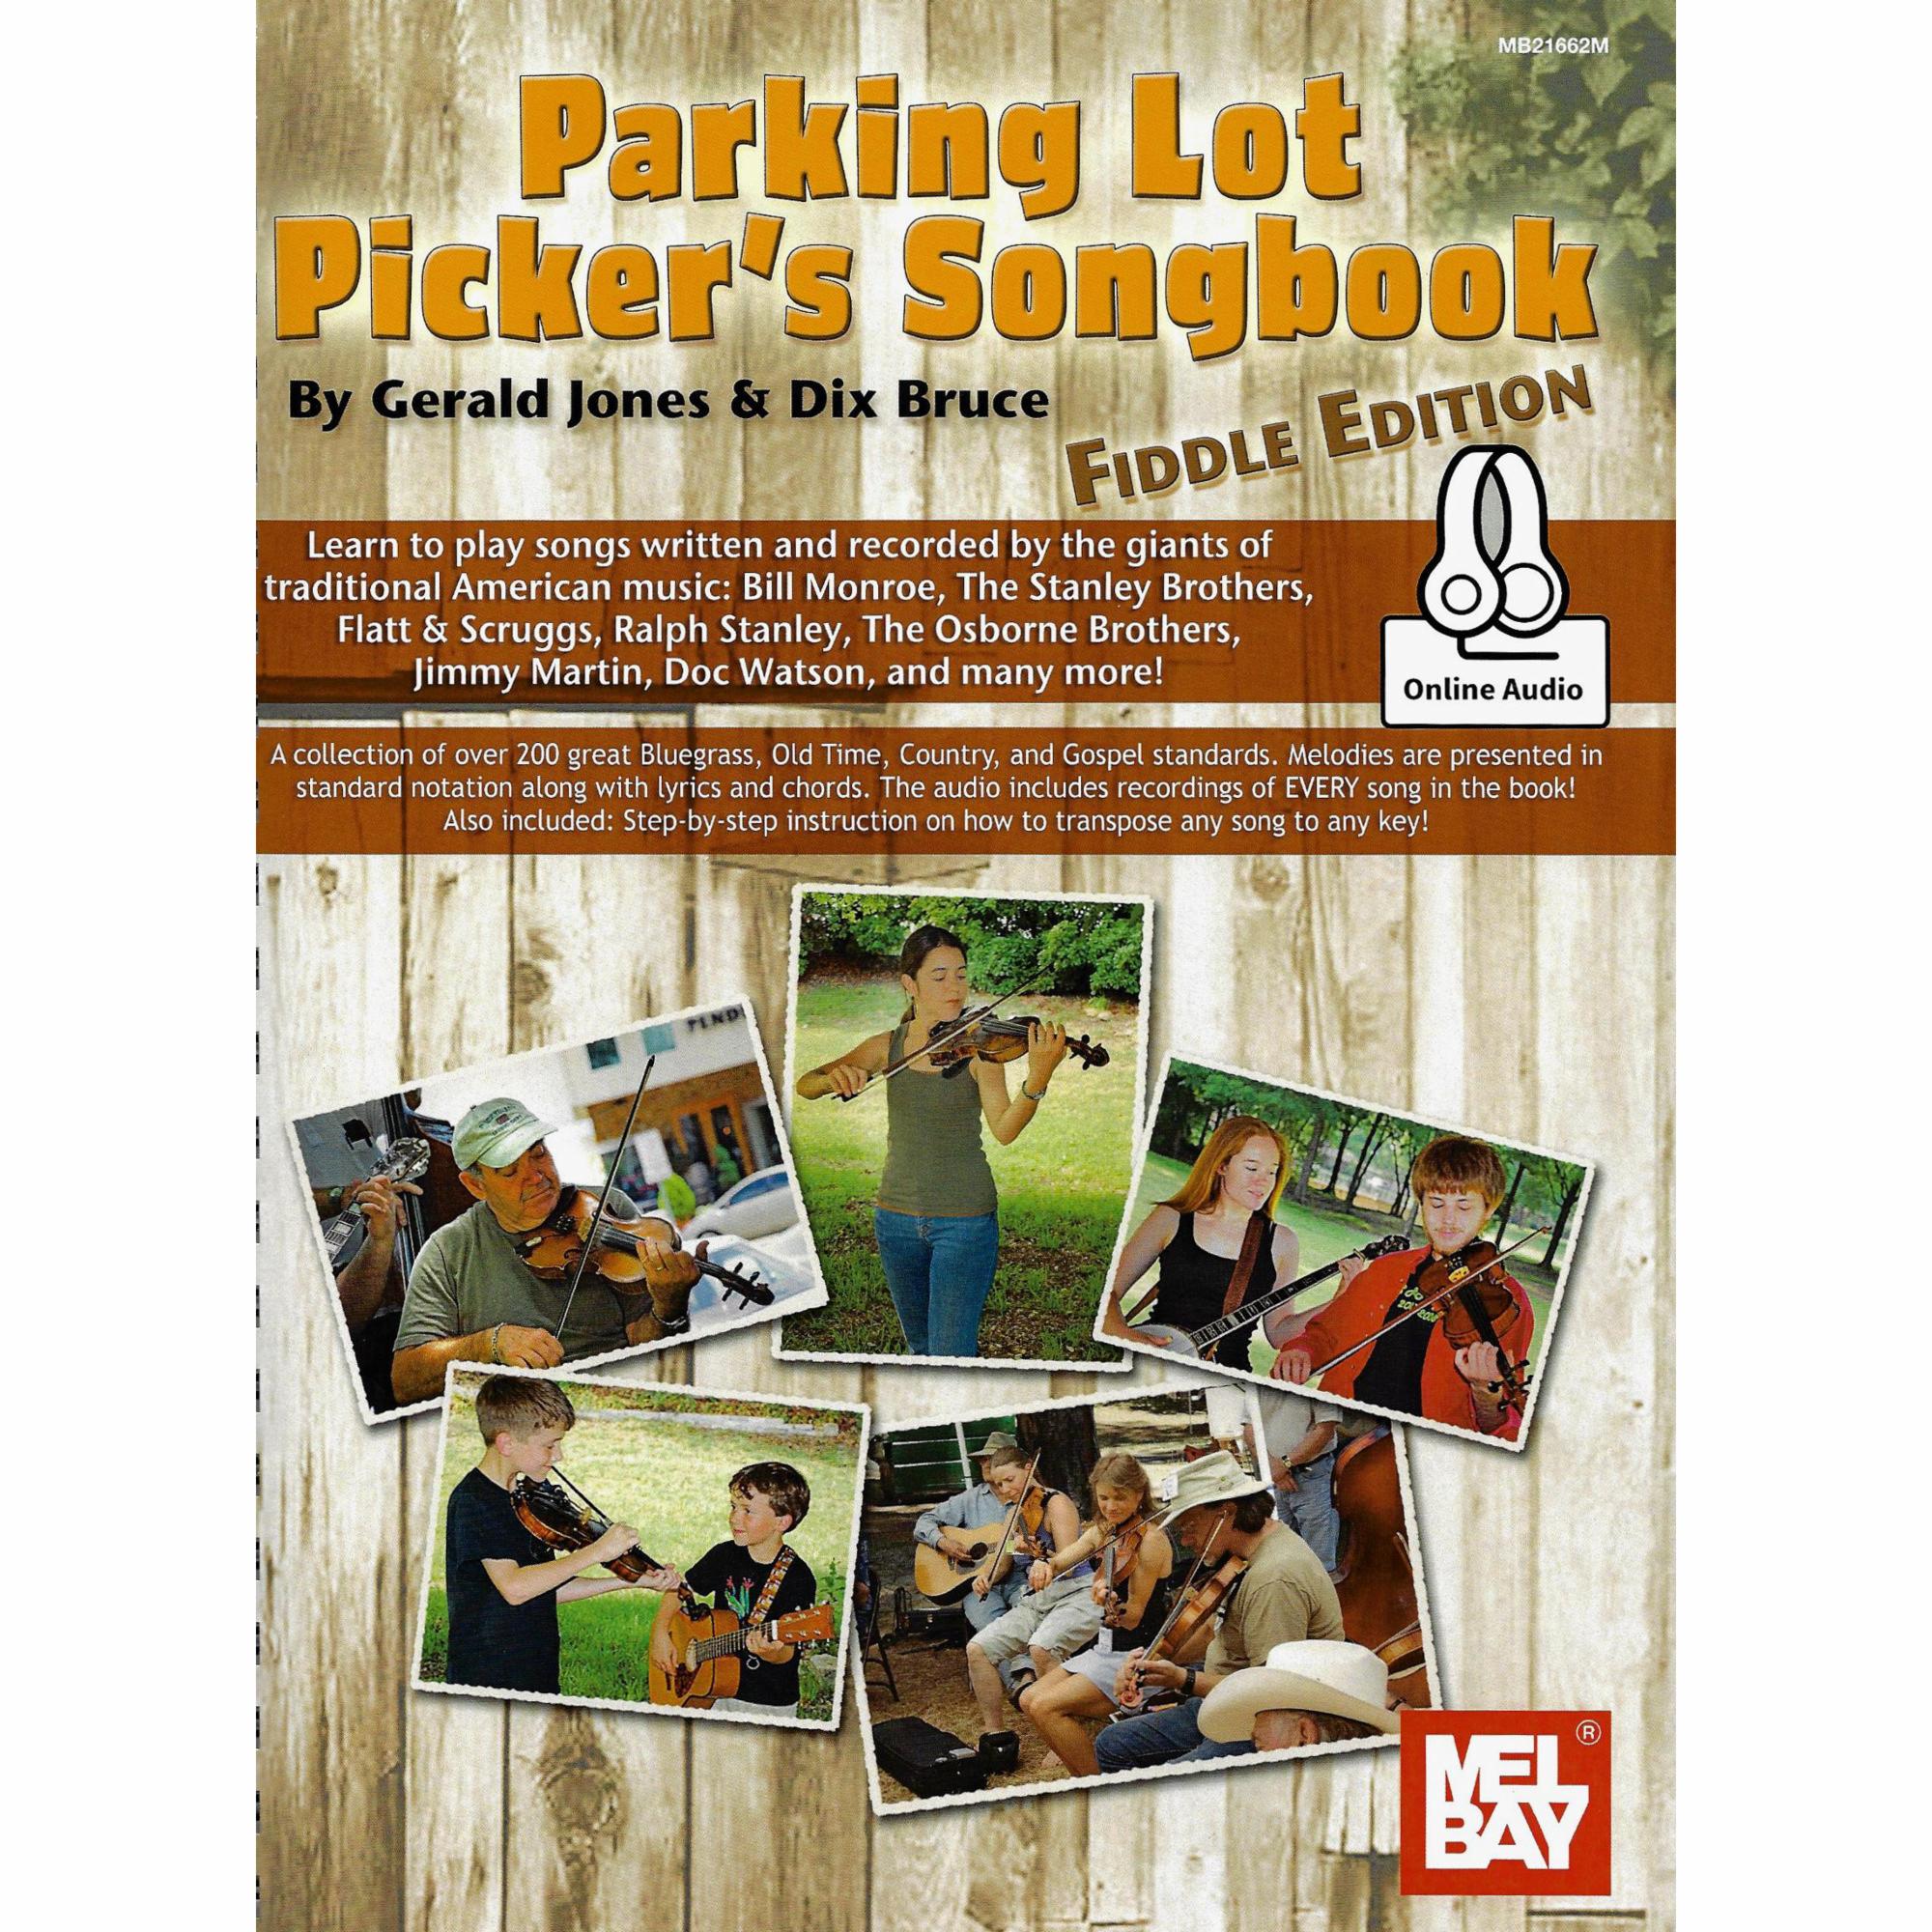 Parking Lot Picker's Songbook: Fiddle Edition